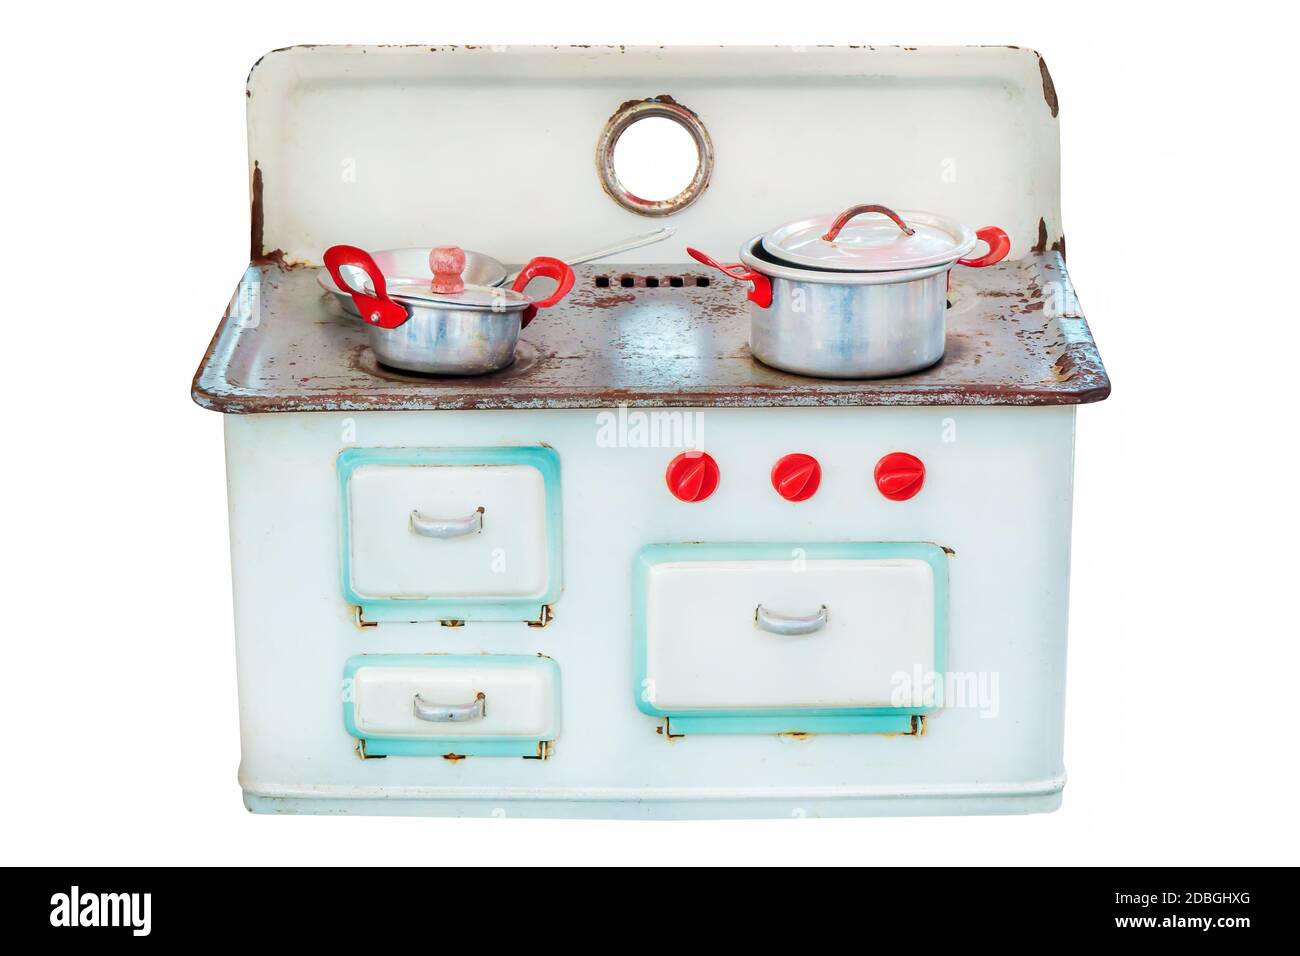 Vintage doll house cooking stove with pans isolated on a white background Stock Photo